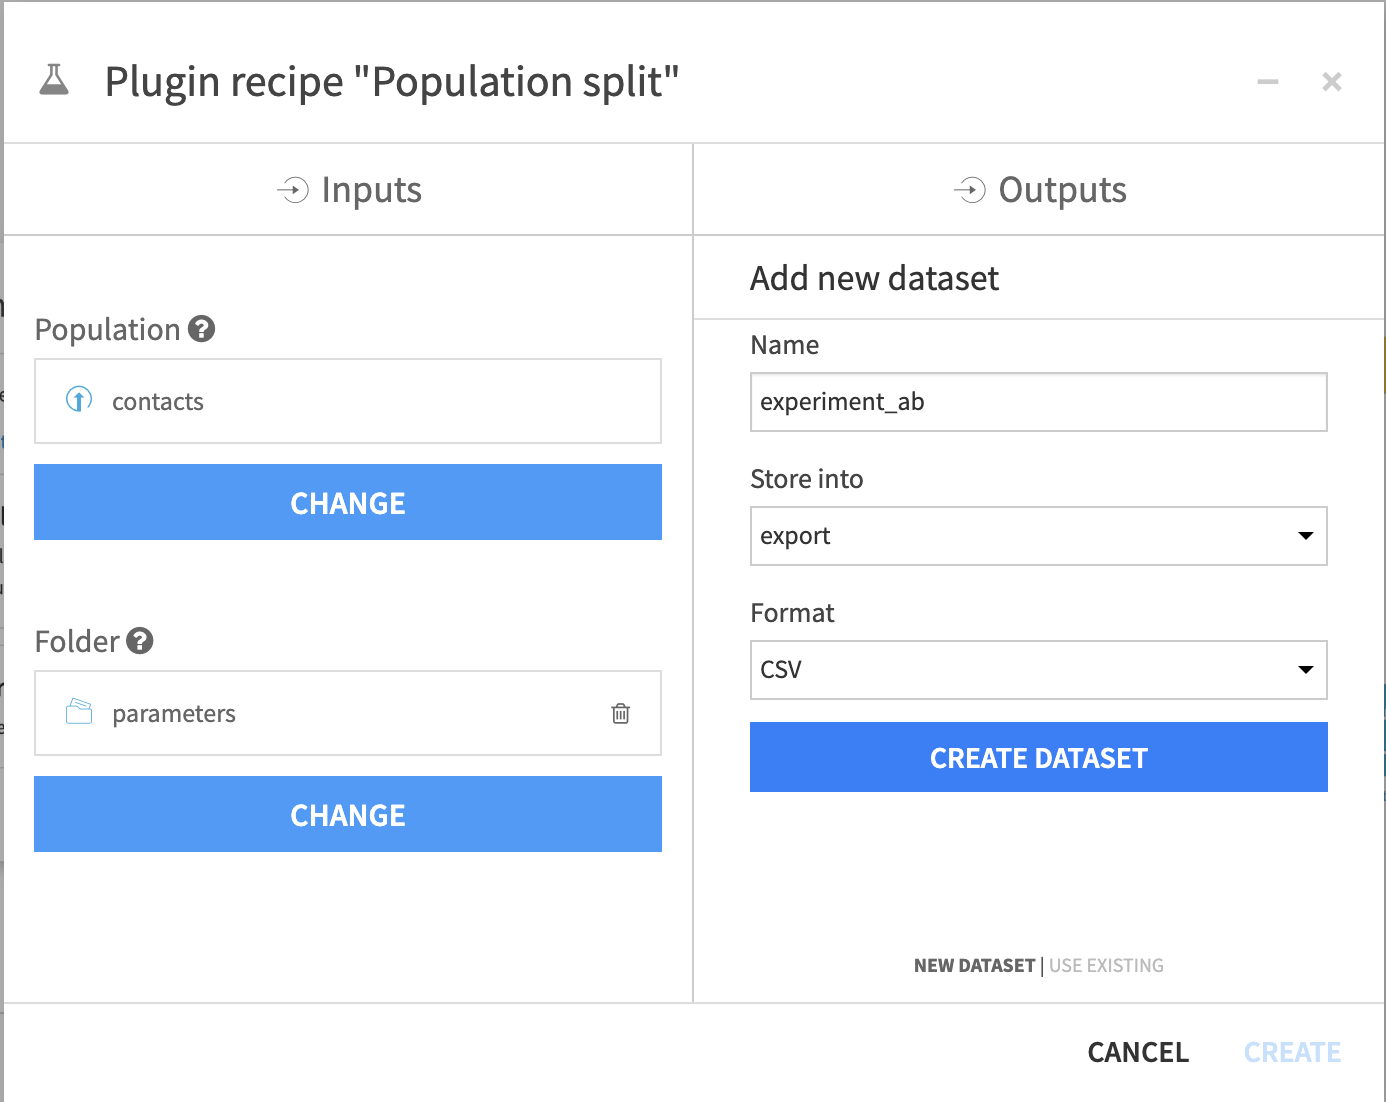 Set inputs and outputs for the Population Split recipe